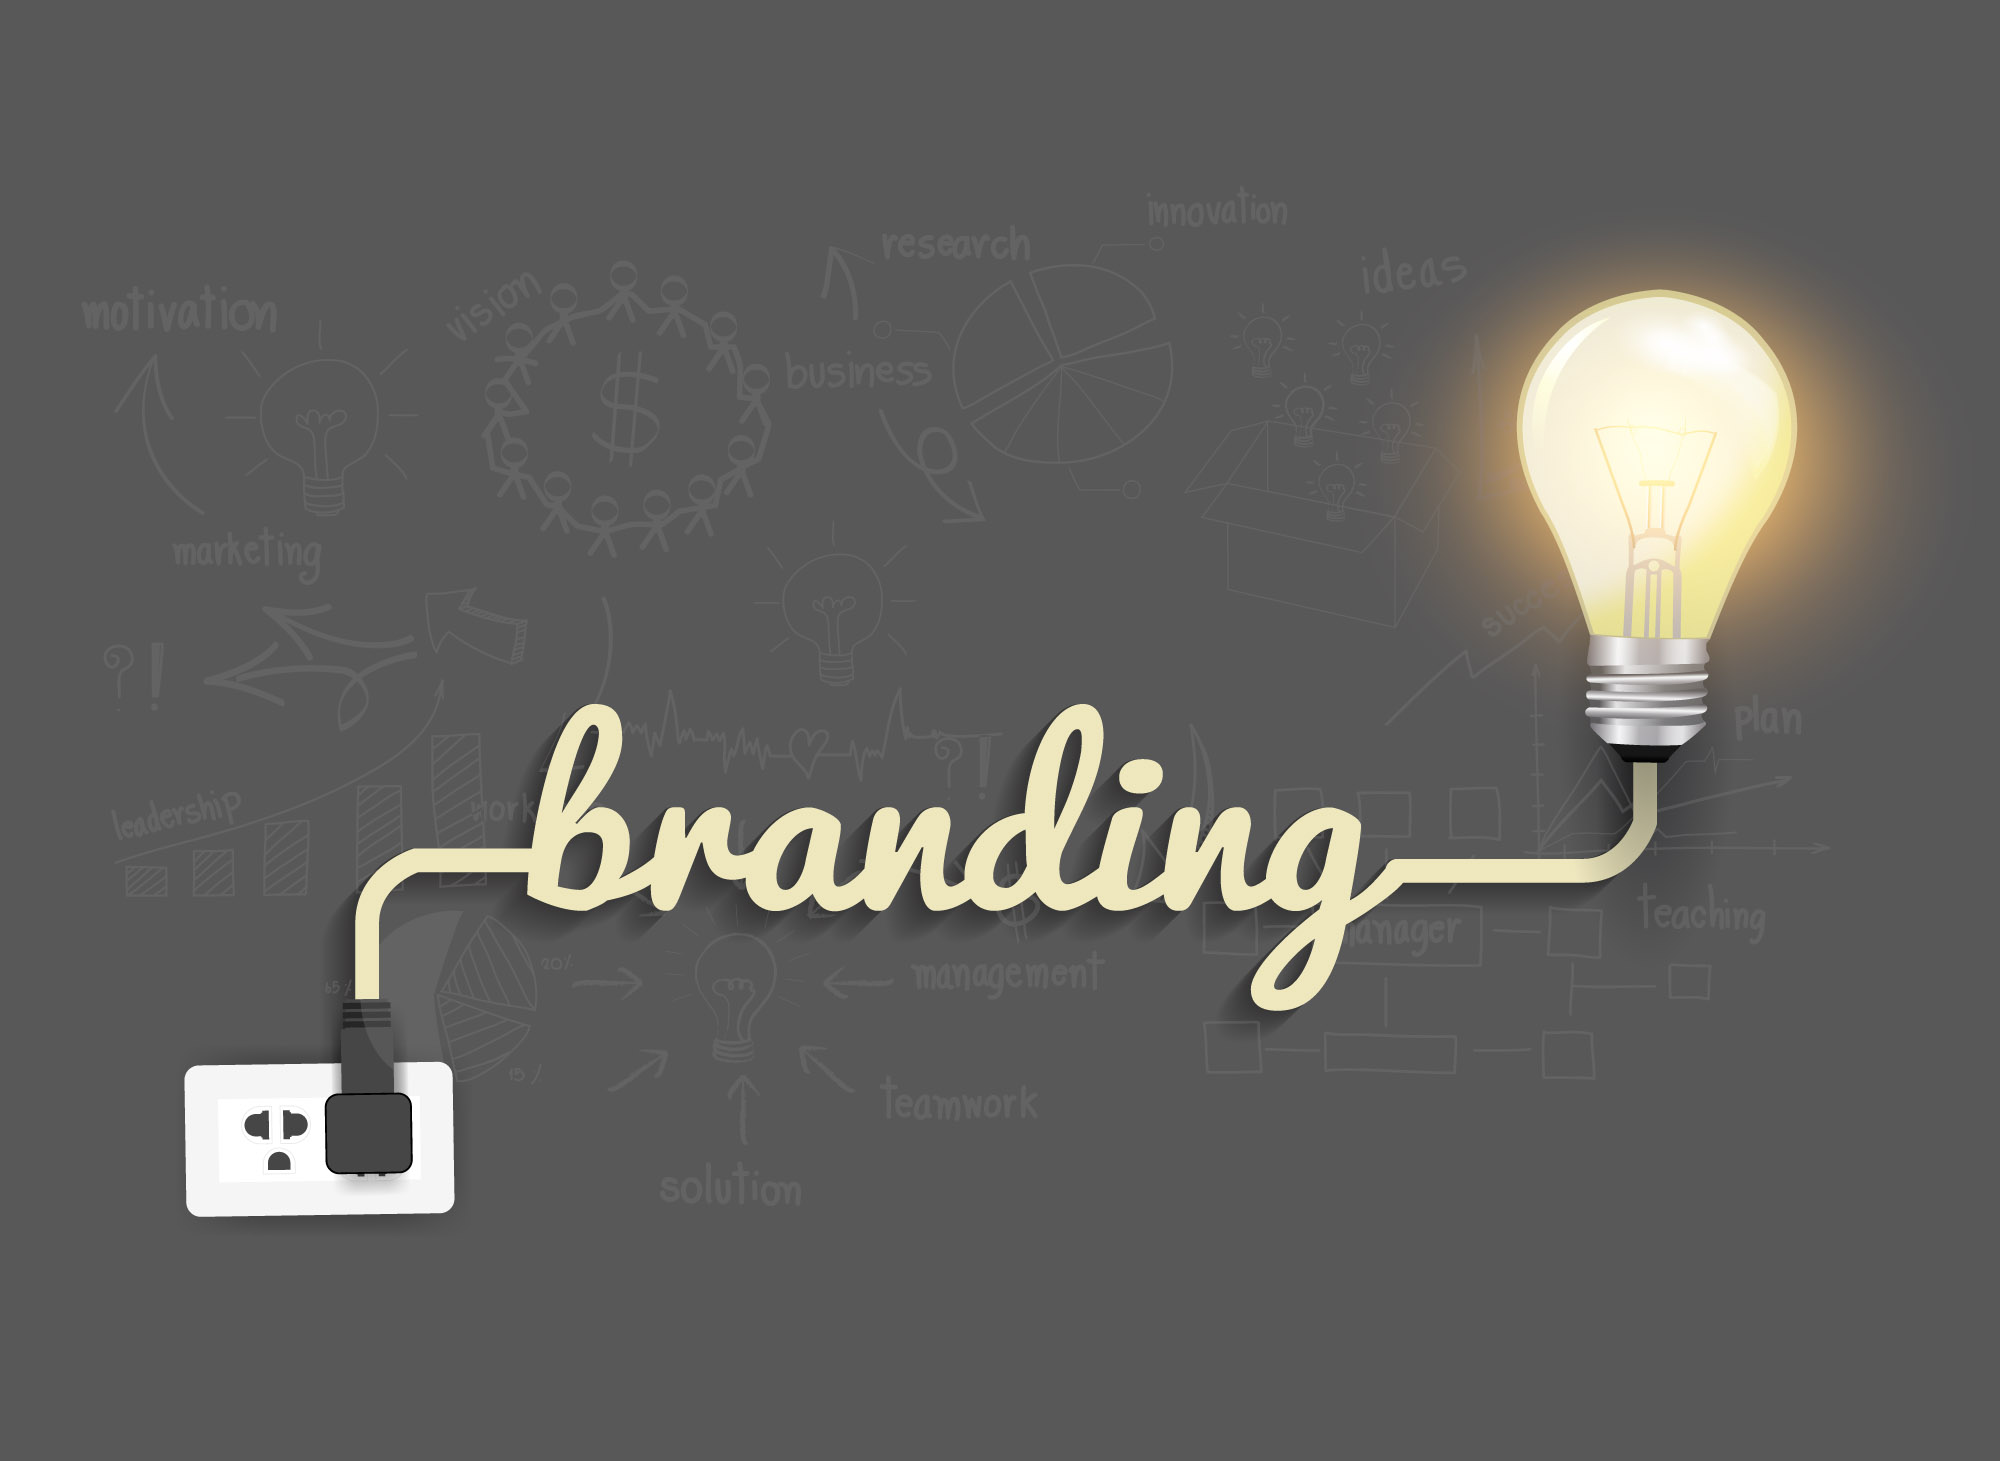 Infographic of the branding strategy of a successful business